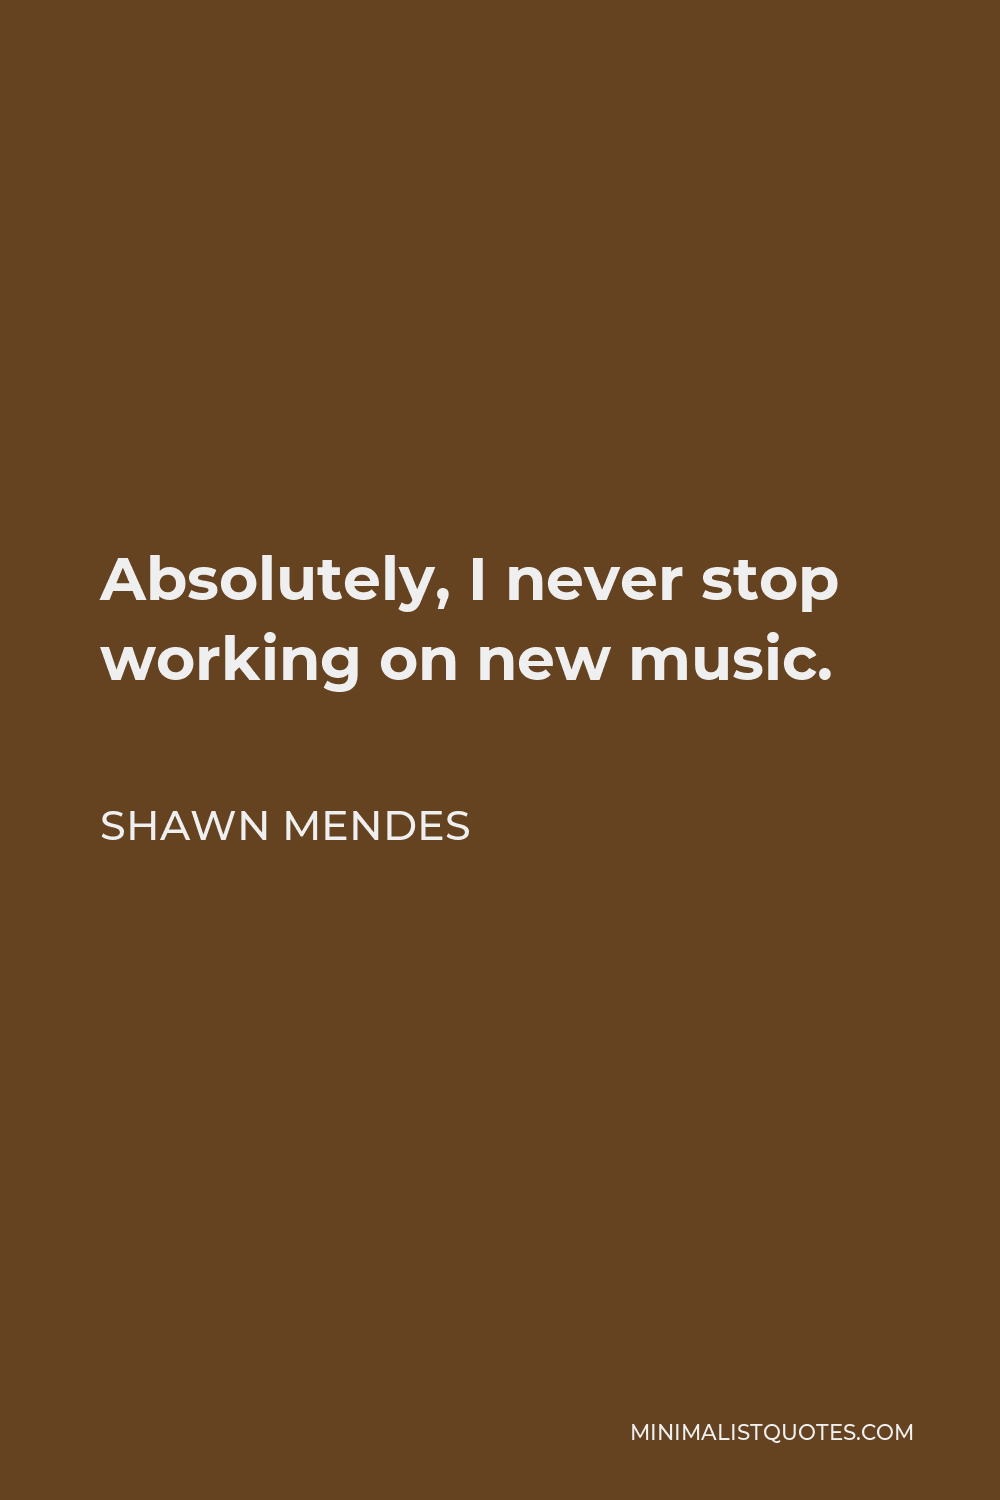 Shawn Mendes Quote - Absolutely, I never stop working on new music.